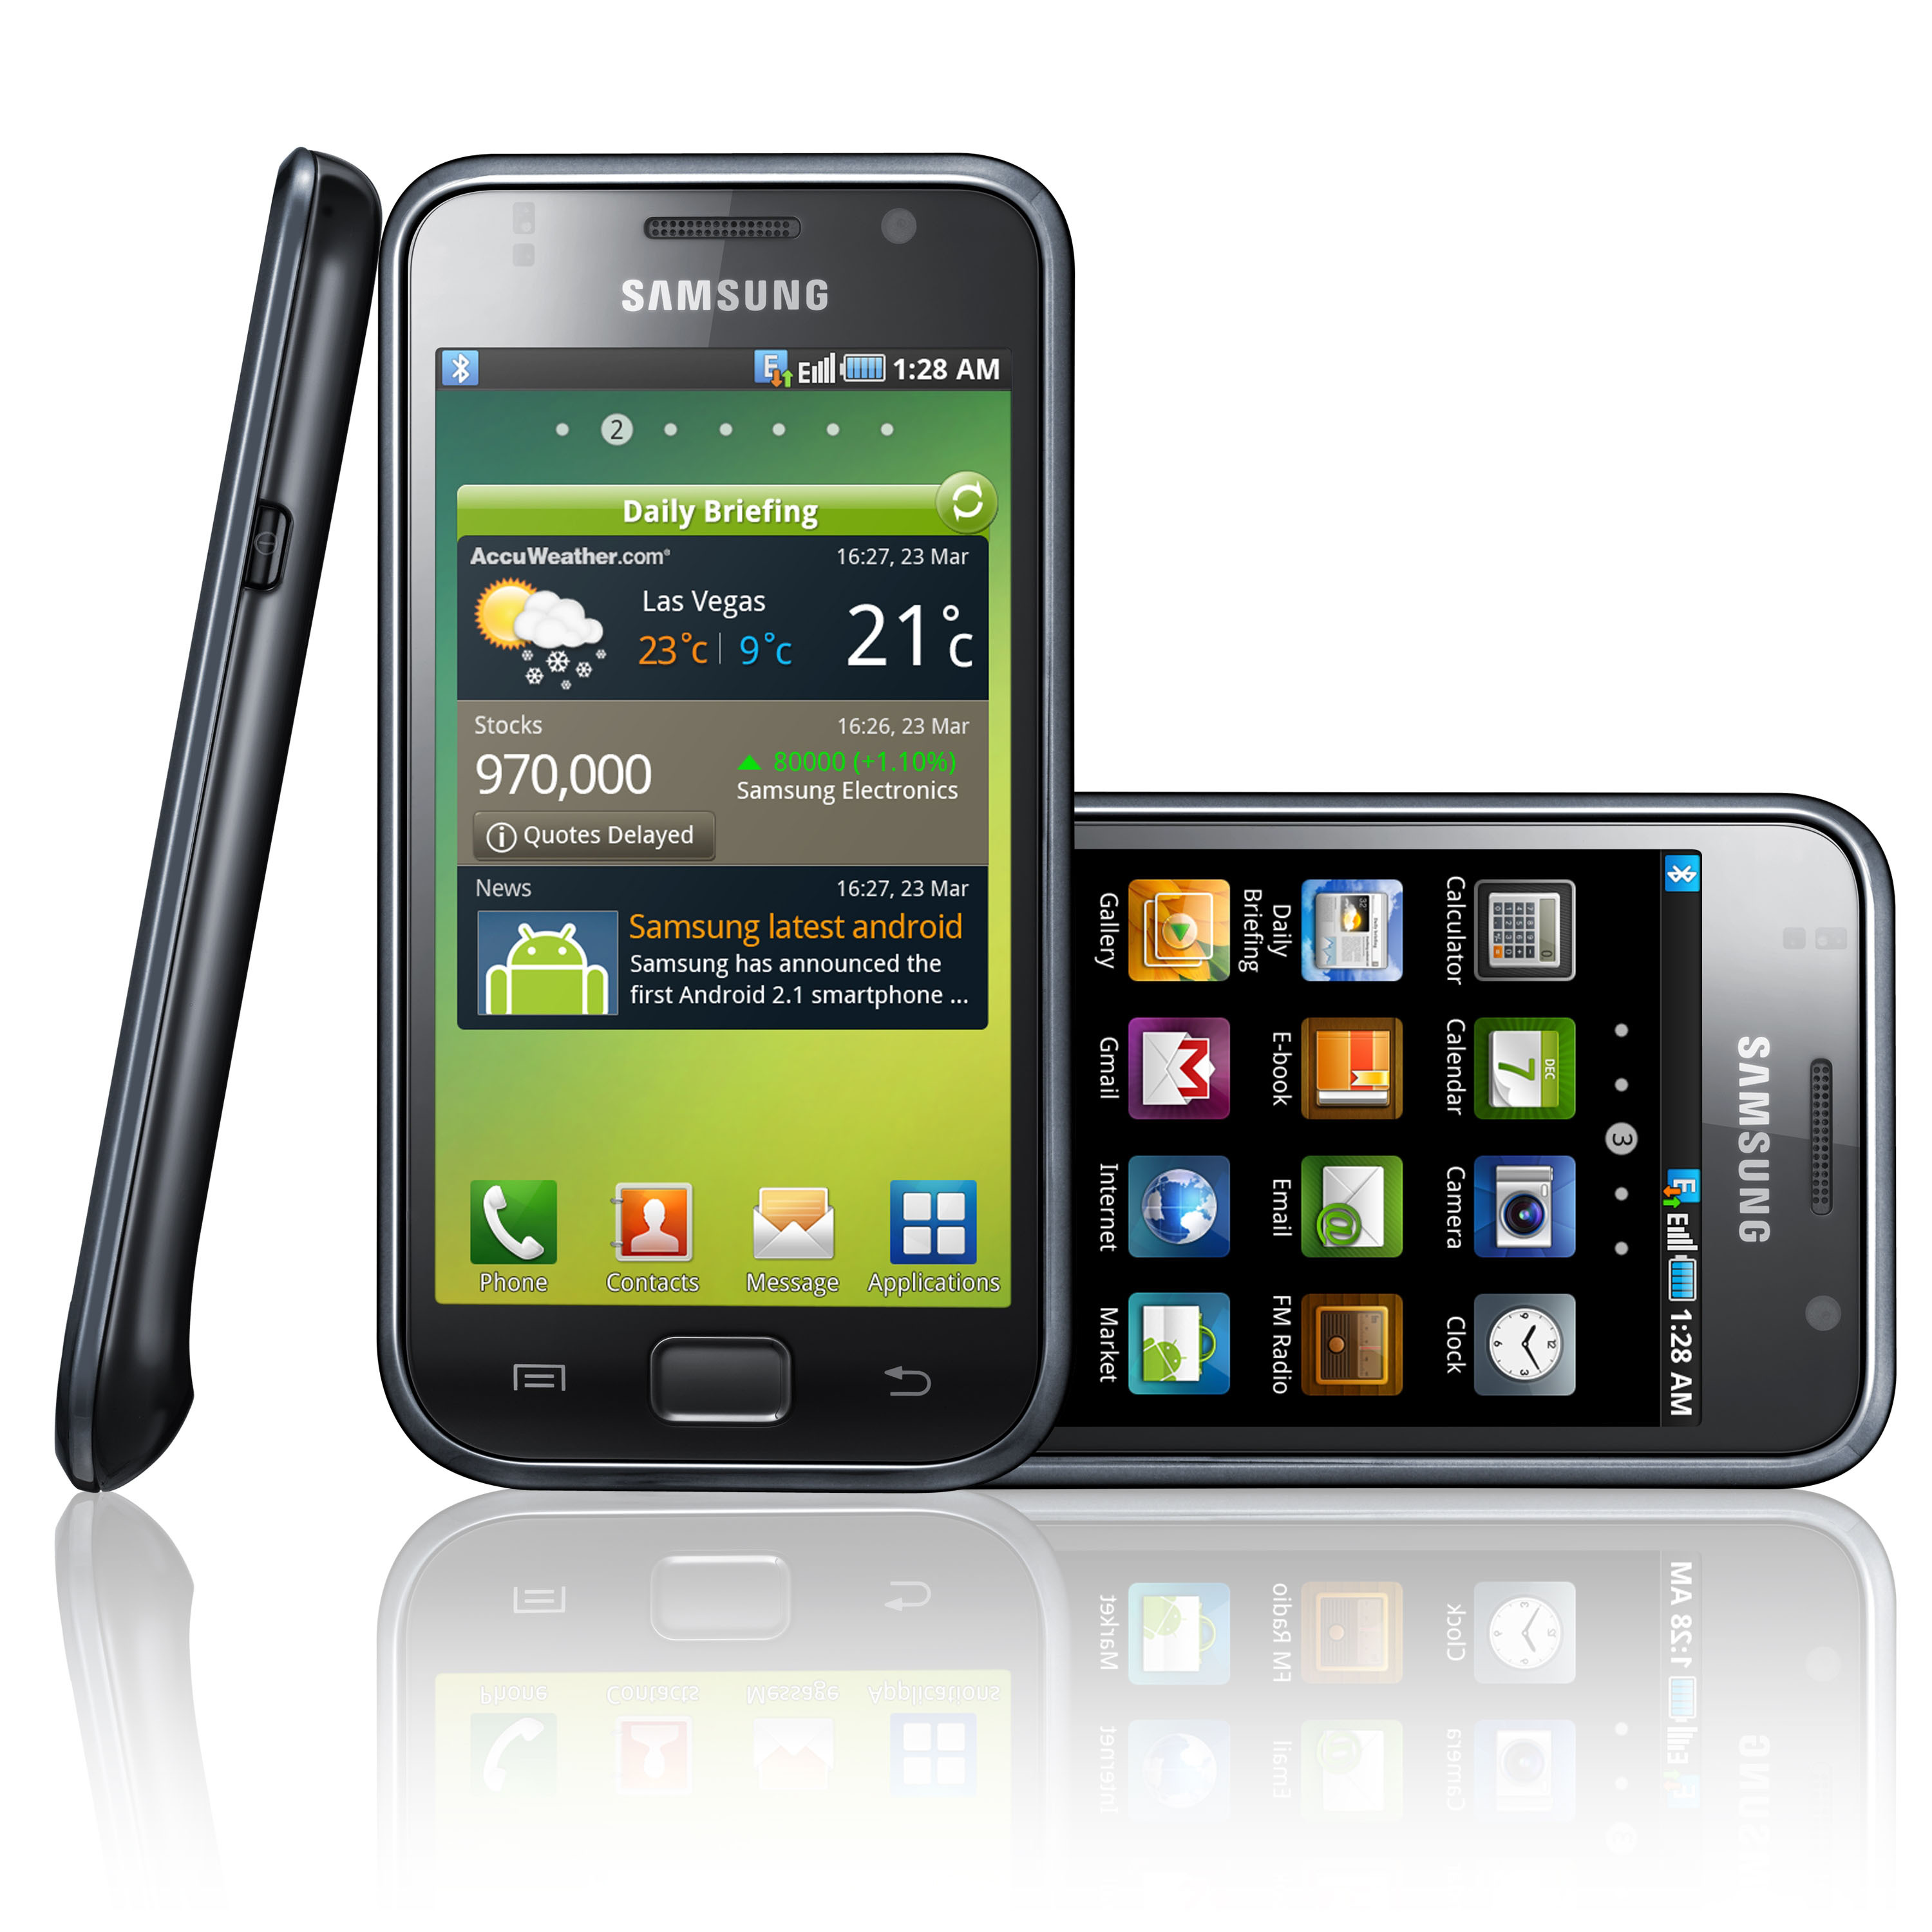 Samsung announce Android Gingerbread for Galaxy S and Tab hits mid-May